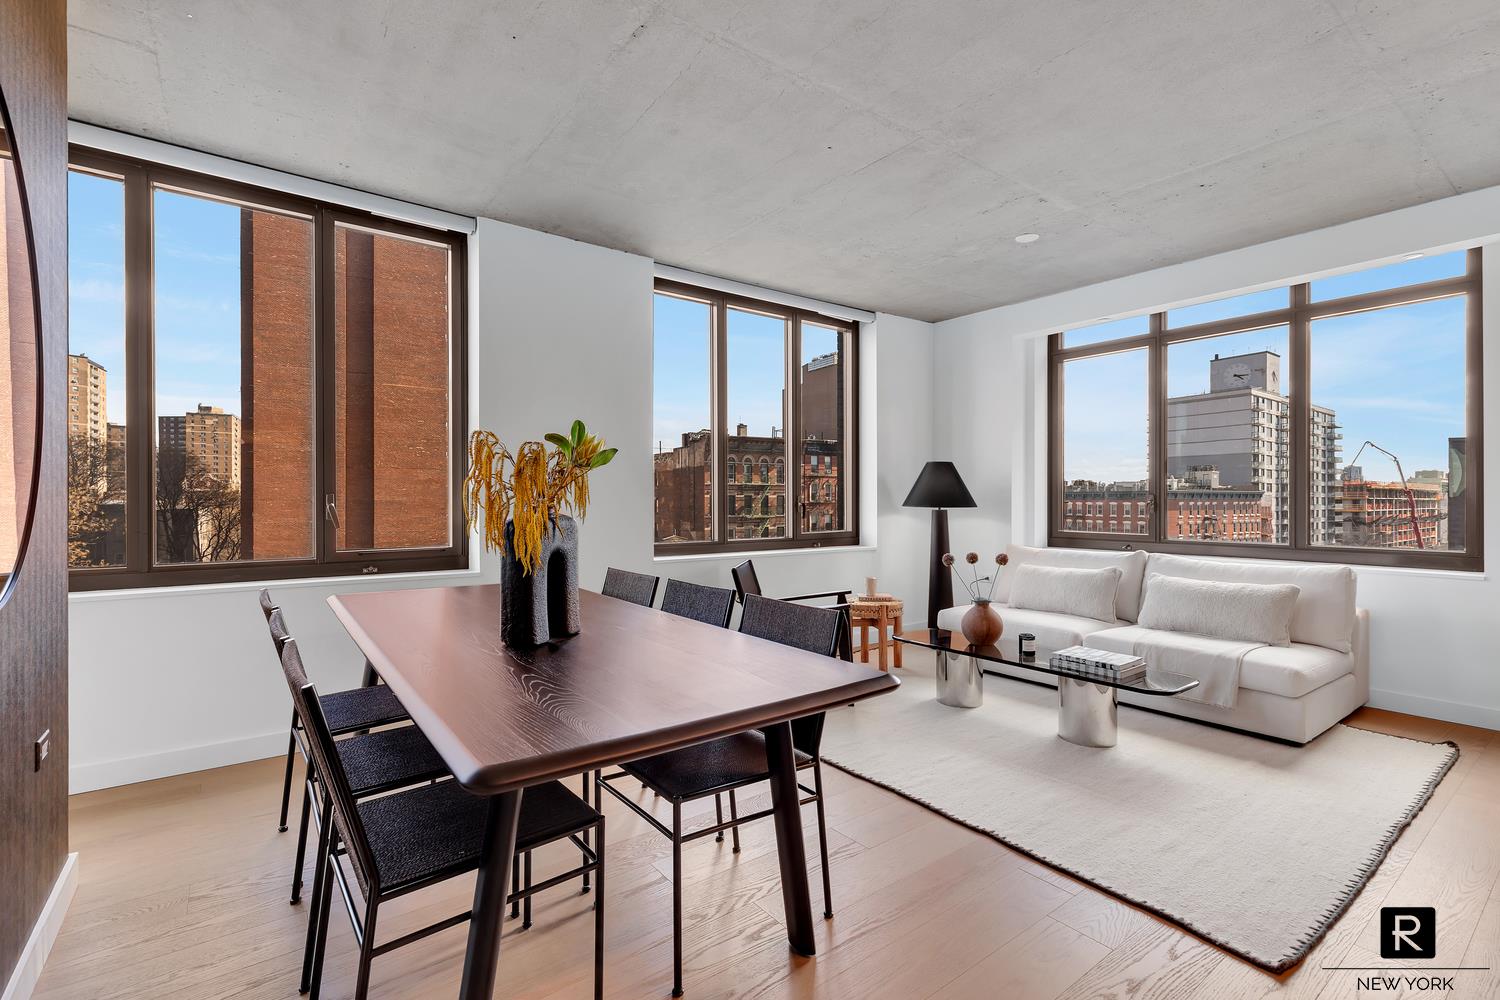 196 Orchard Street 5-D, Lower East Side, Downtown, NYC - 2 Bedrooms  
2 Bathrooms  
4 Rooms - 